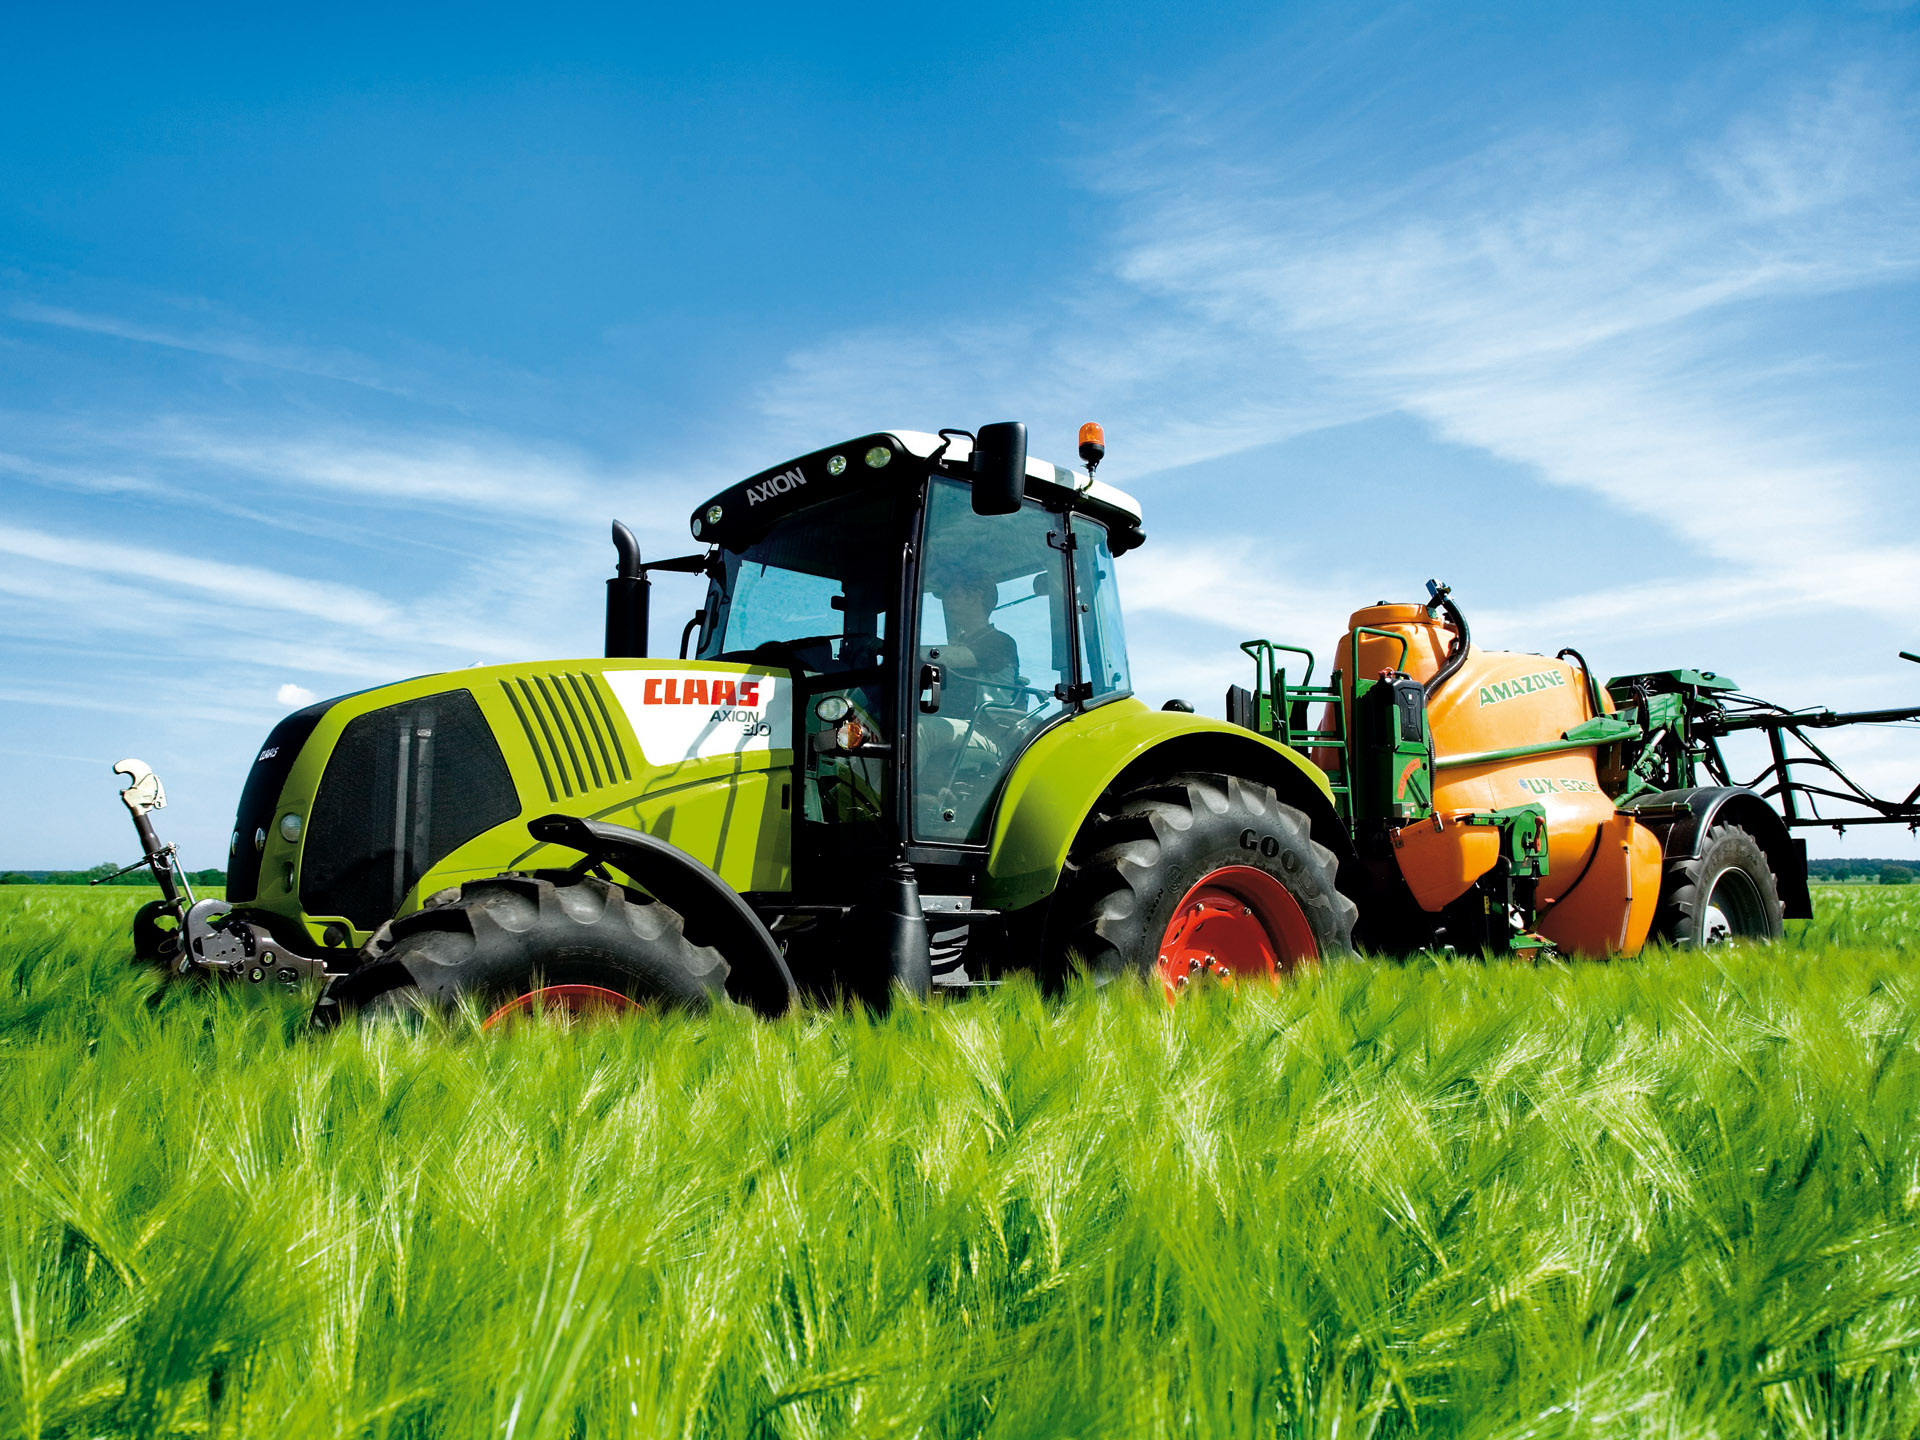 Claas Backgrounds, Compatible - PC, Mobile, Gadgets| 1920x1440 px